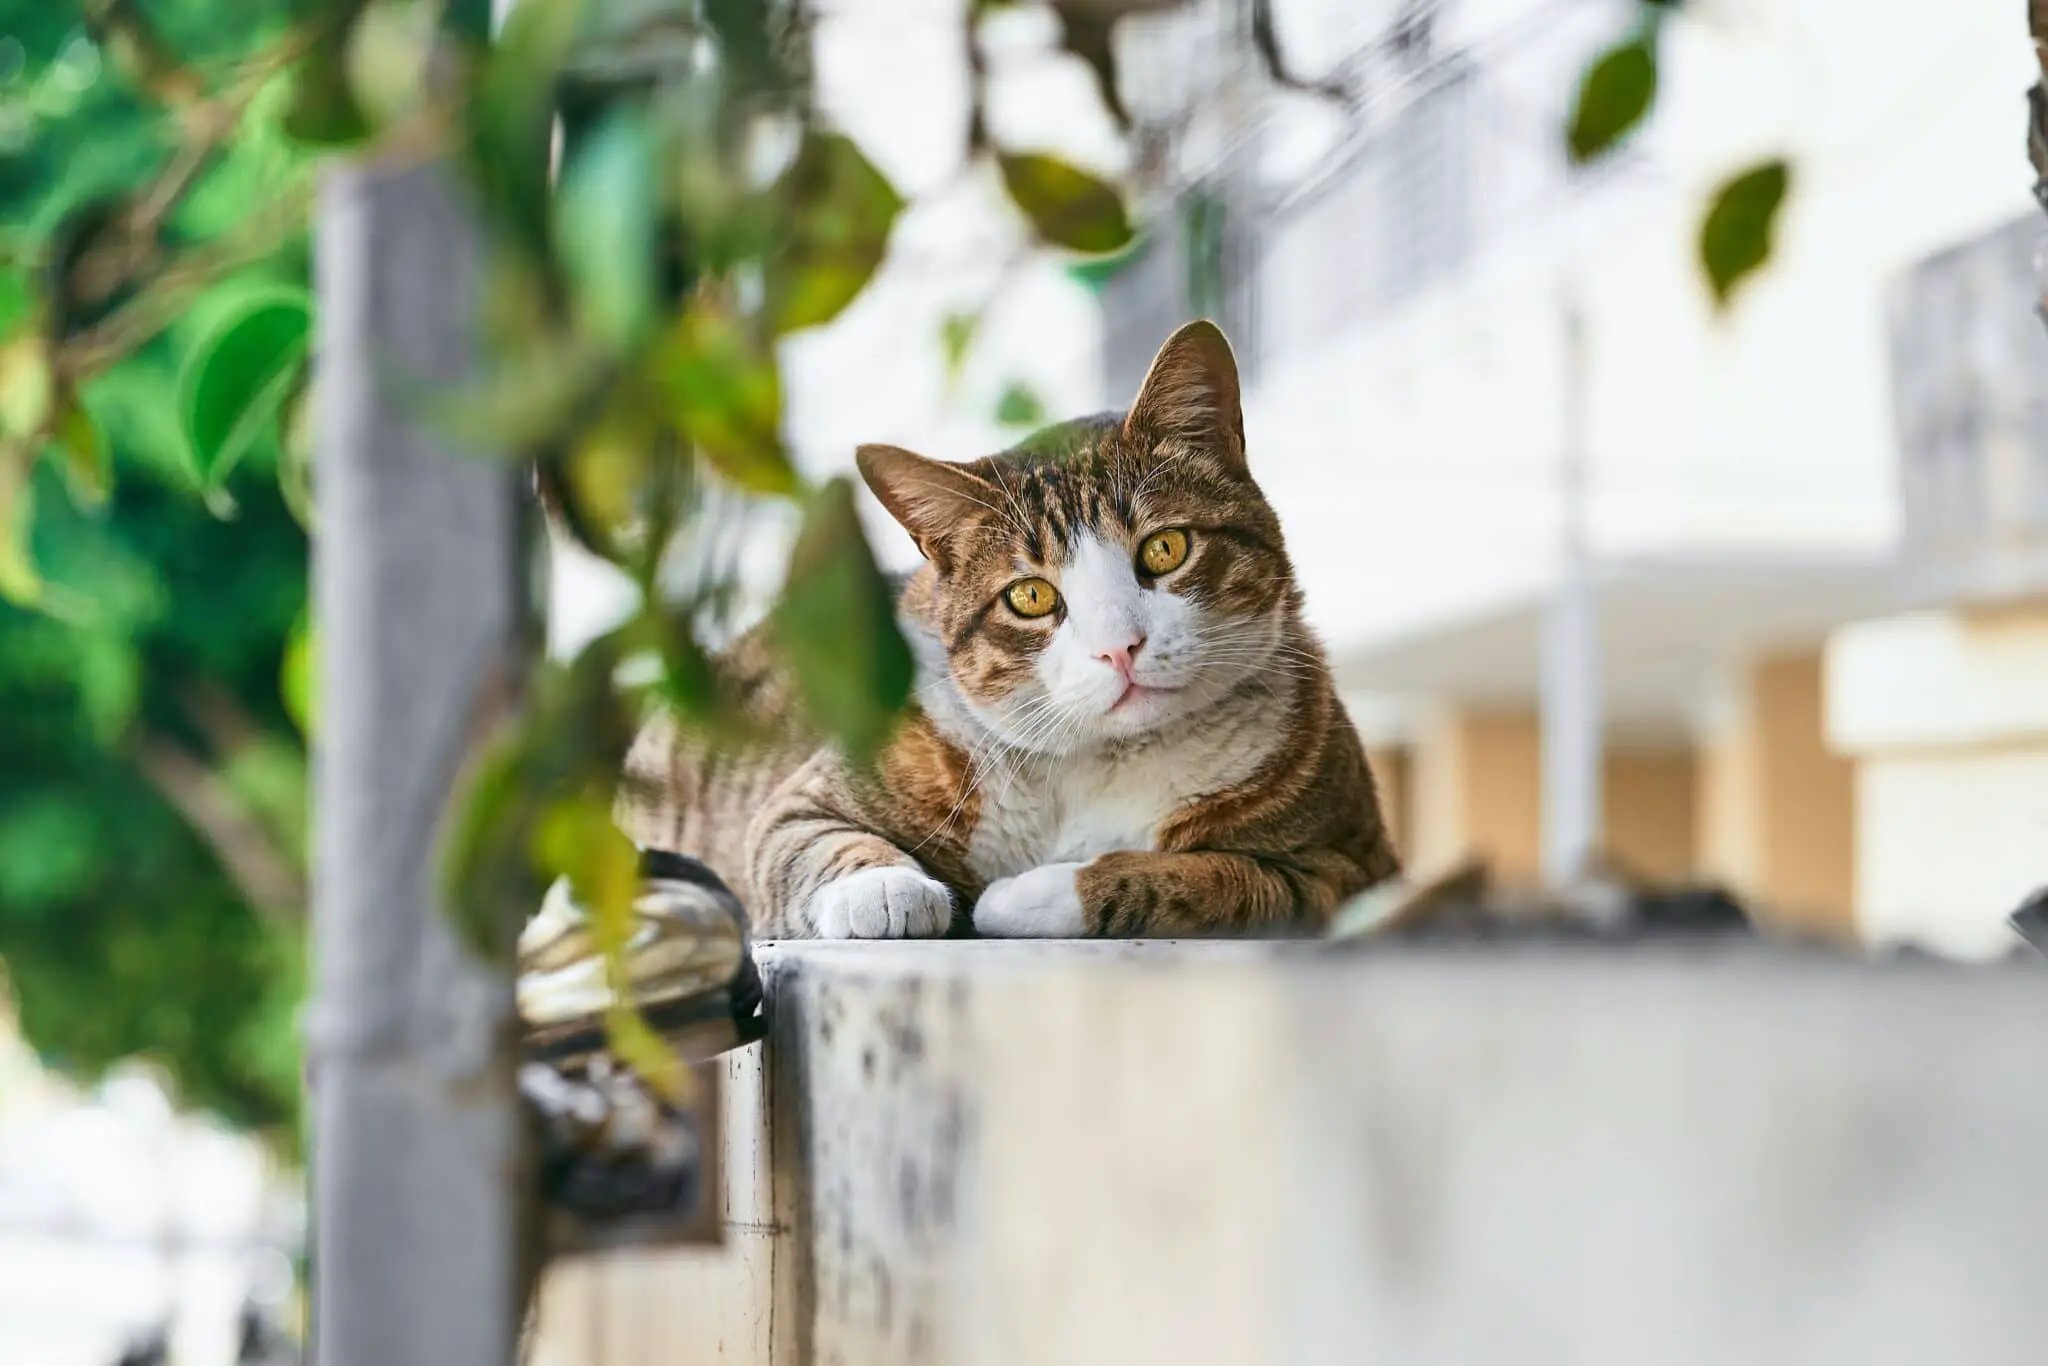 How To Catch A Feral Kitten- 10 Best Practices To Follow